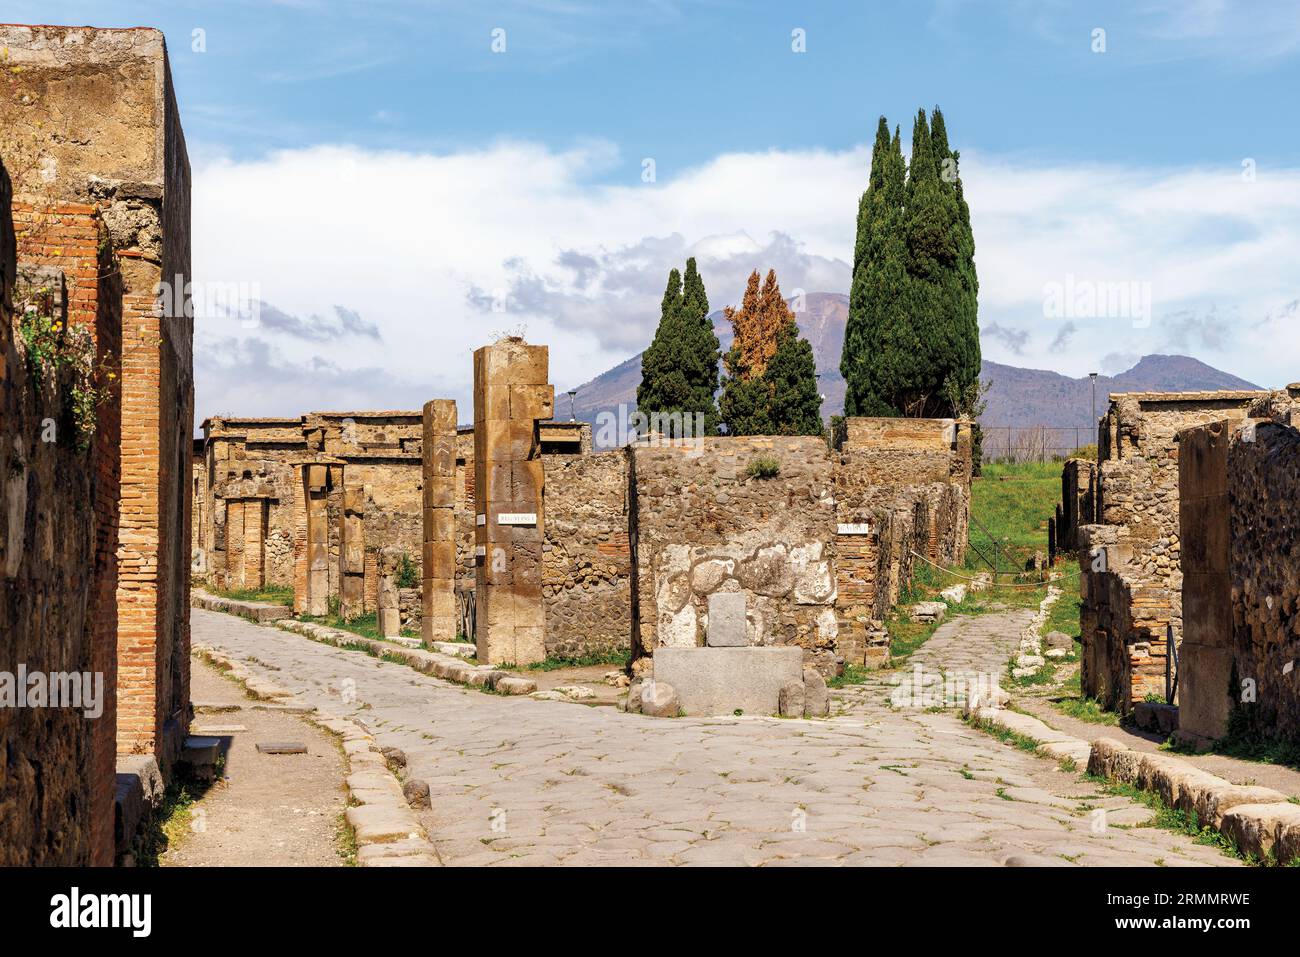 Pompeii Archaeological Site, Campania, Italy.  Excavated streets.  Mount Vesuvius in background.  Pompeii, Herculaneum, and Torre Annunziata are colle Stock Photo